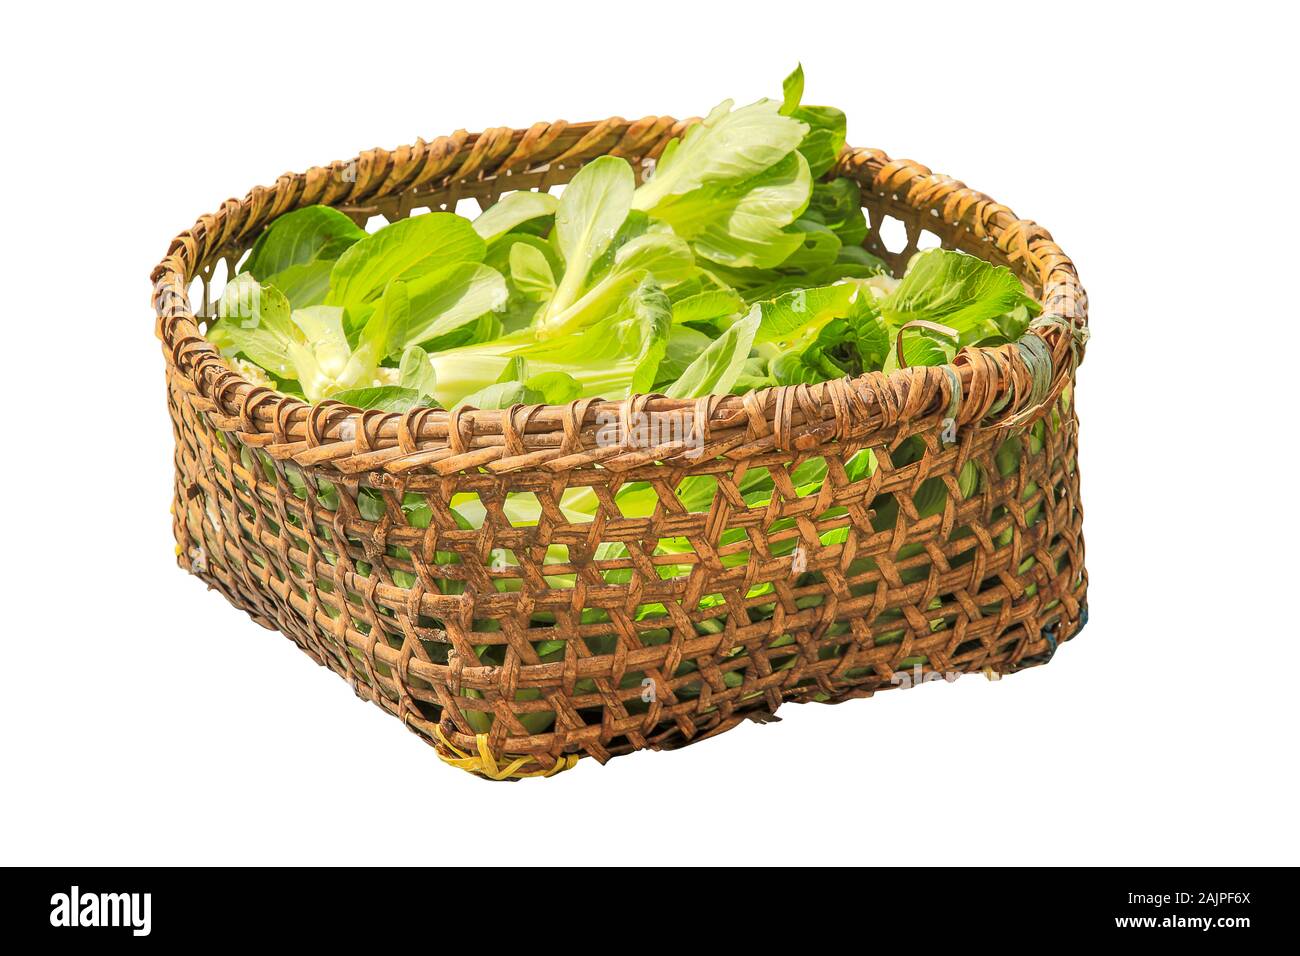 Fresh salad in a wicker basket on a white background. Stock Photo